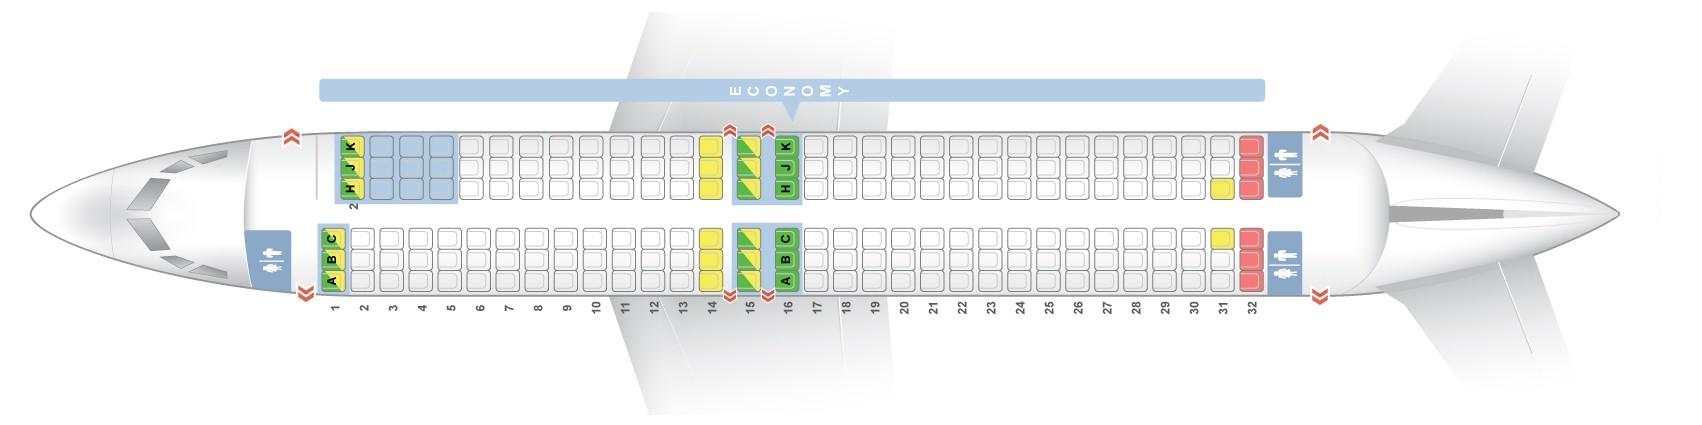 Boeing 738 Seating Chart